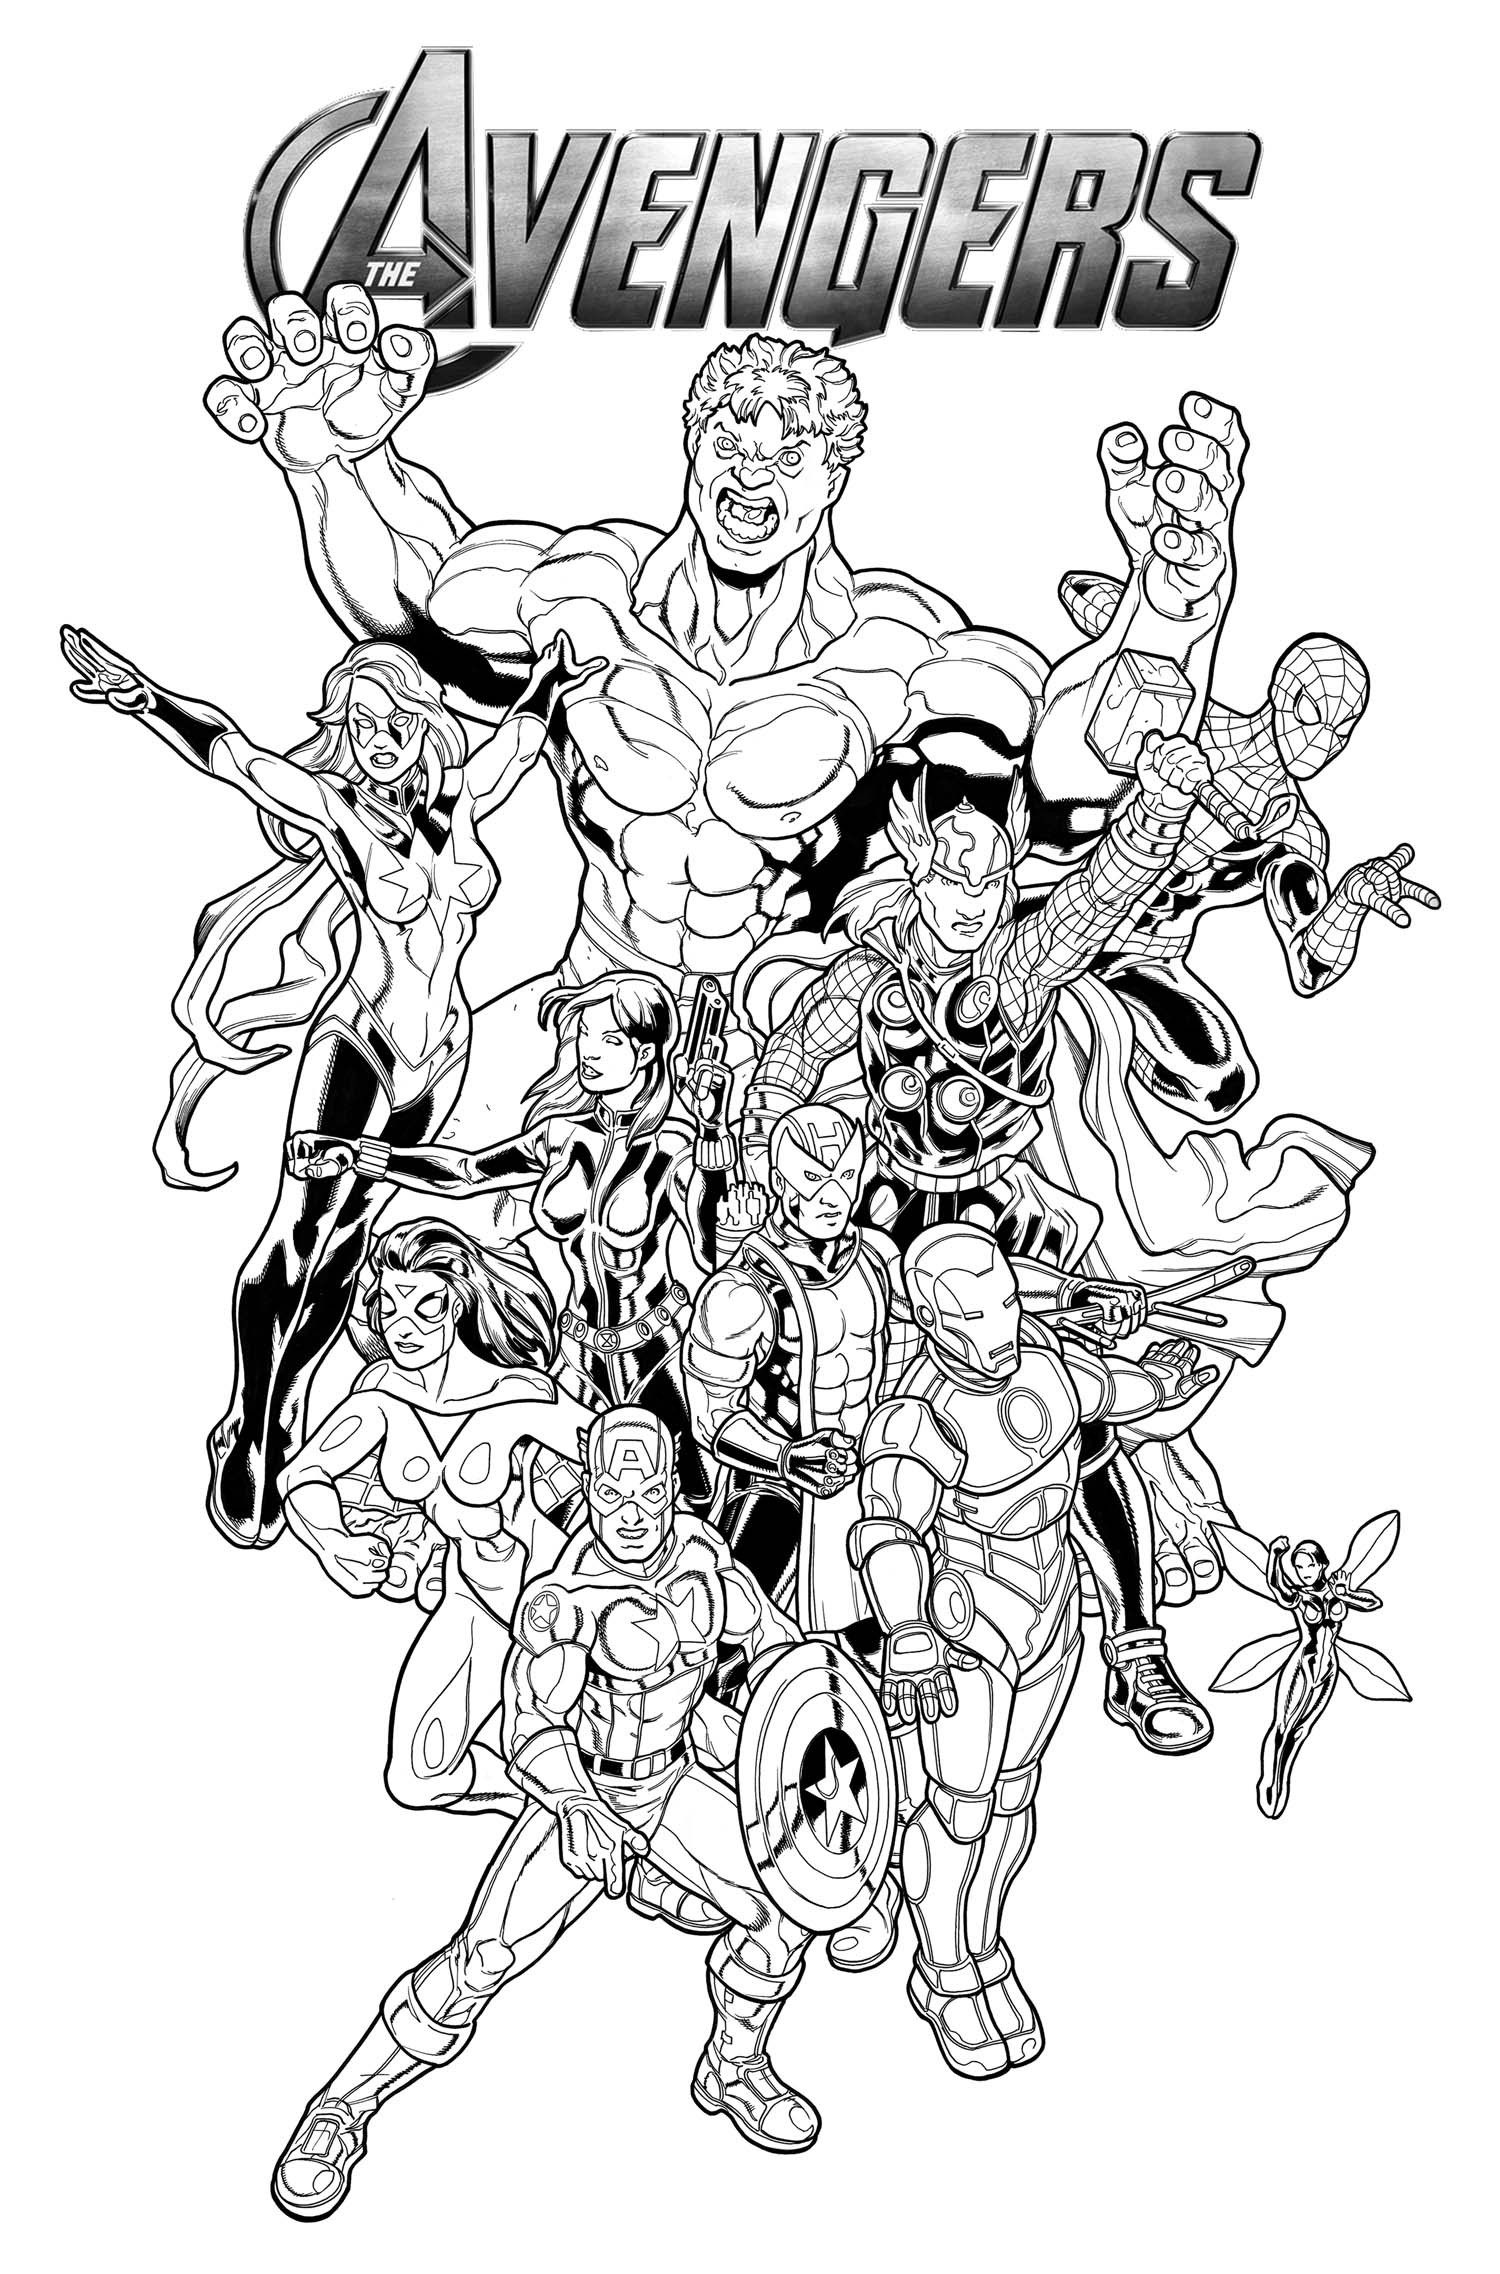 Printable Avengers Coloring Pages
 Avengers Coloring Pages